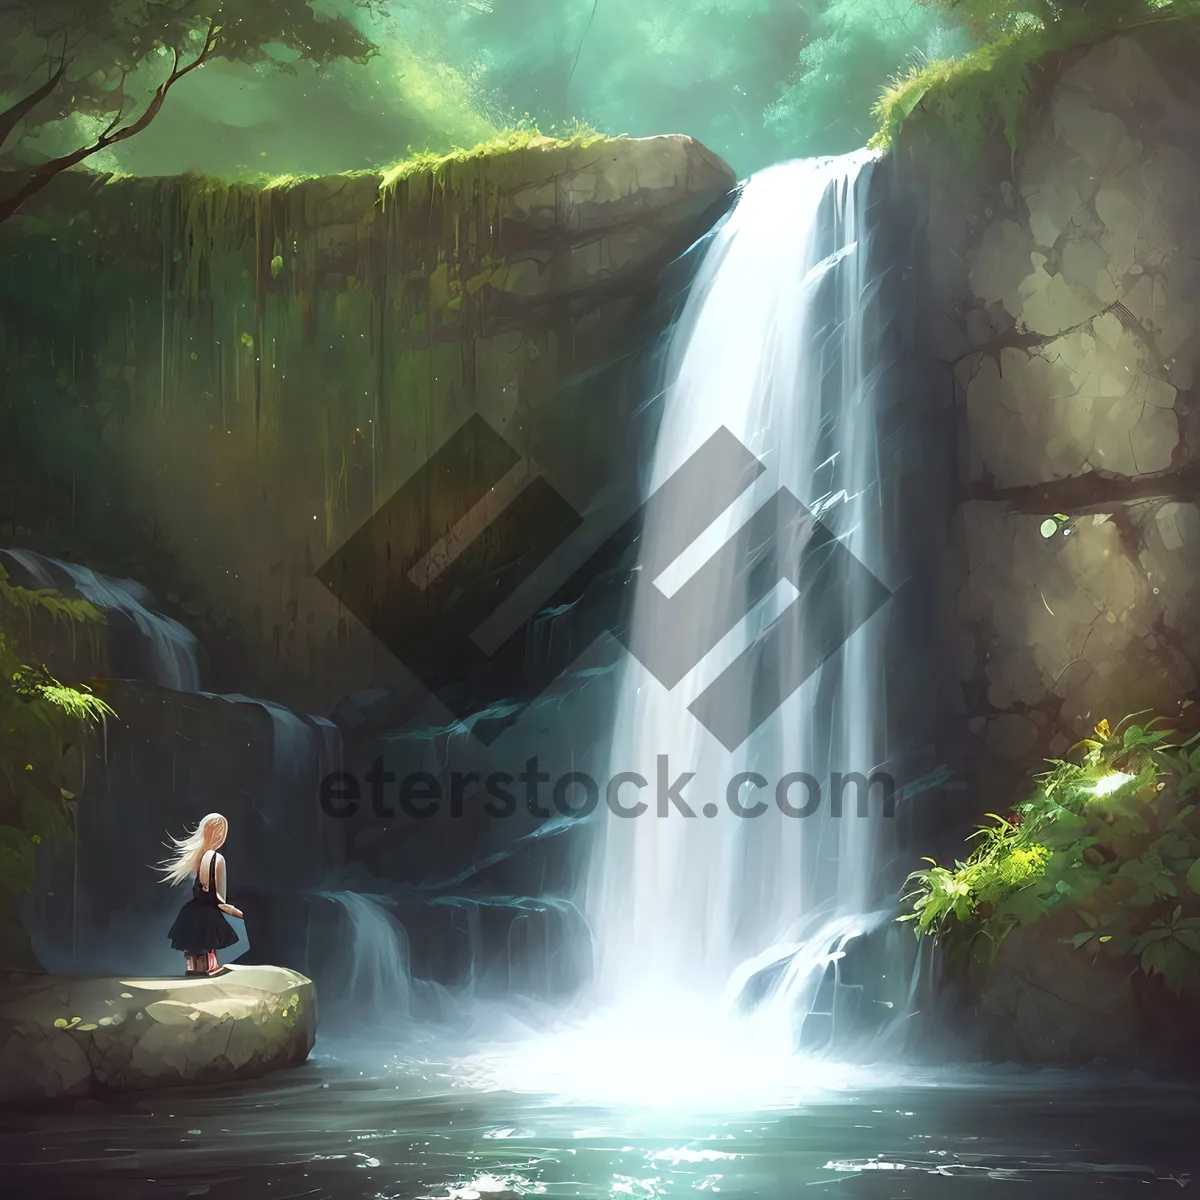 Picture of Idyllic Waterfall Surrounded by Lush Forest